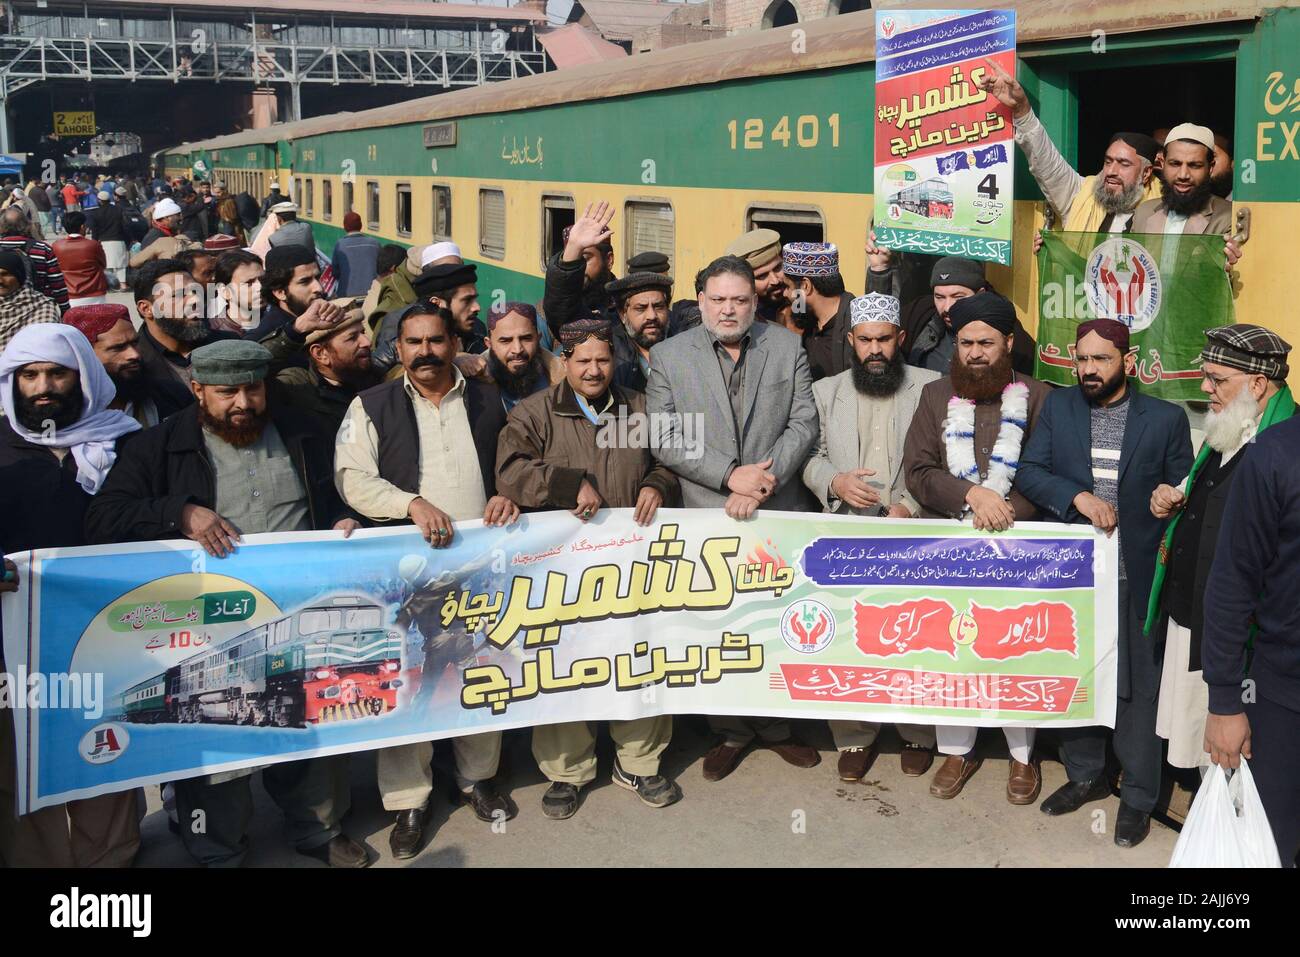 Activists of Pakistan Sunni Tahreek (PST) holding party flag while installed banner on train during their departure titled “Jalta Kashmir Bachao Train March” from Lahore to Karachi at Railway Station in provincial capital Lahore. Pakistan Sunni Tahreek (PST) titled “Jalta Kashmir Bachao Train March” from Lahore to Karachi express solidarity with the people of Indian occupied Kashmir (IOK) who have been living under curfew imposed by the Indian government on August 5, 2019.Central leader of Pakistan Sunni Tahreek (PST) Shahdab Raza Nakshbandi, Dr Shahid Hussain, Sharif-u-ddin Qaddafi, Sardar Ta Stock Photo